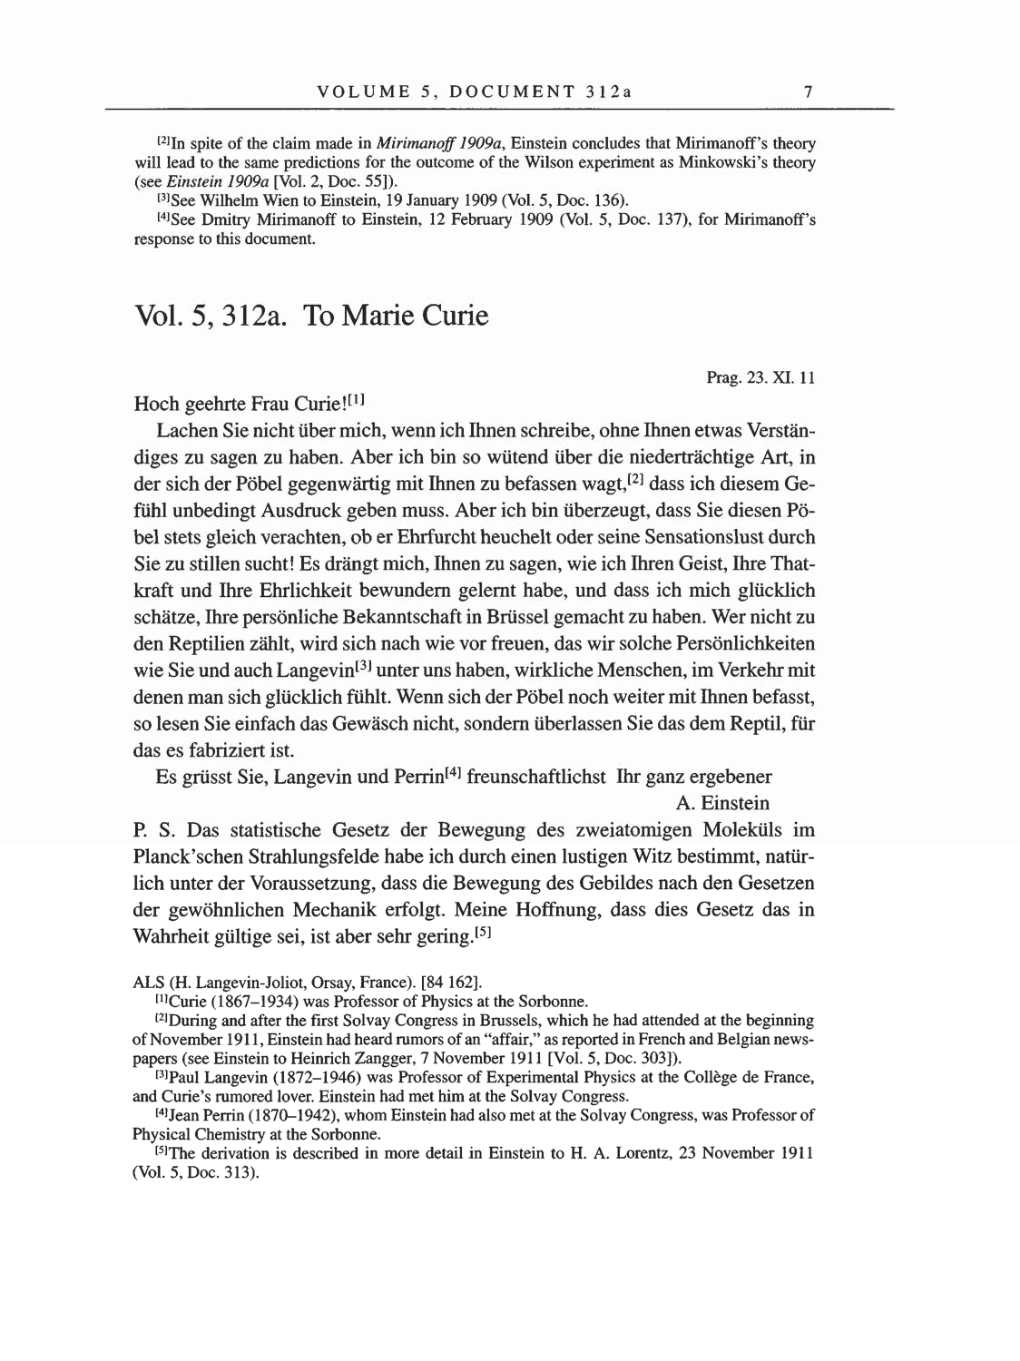 Volume 8, Part A: The Berlin Years: Correspondence 1914-1917 page 7